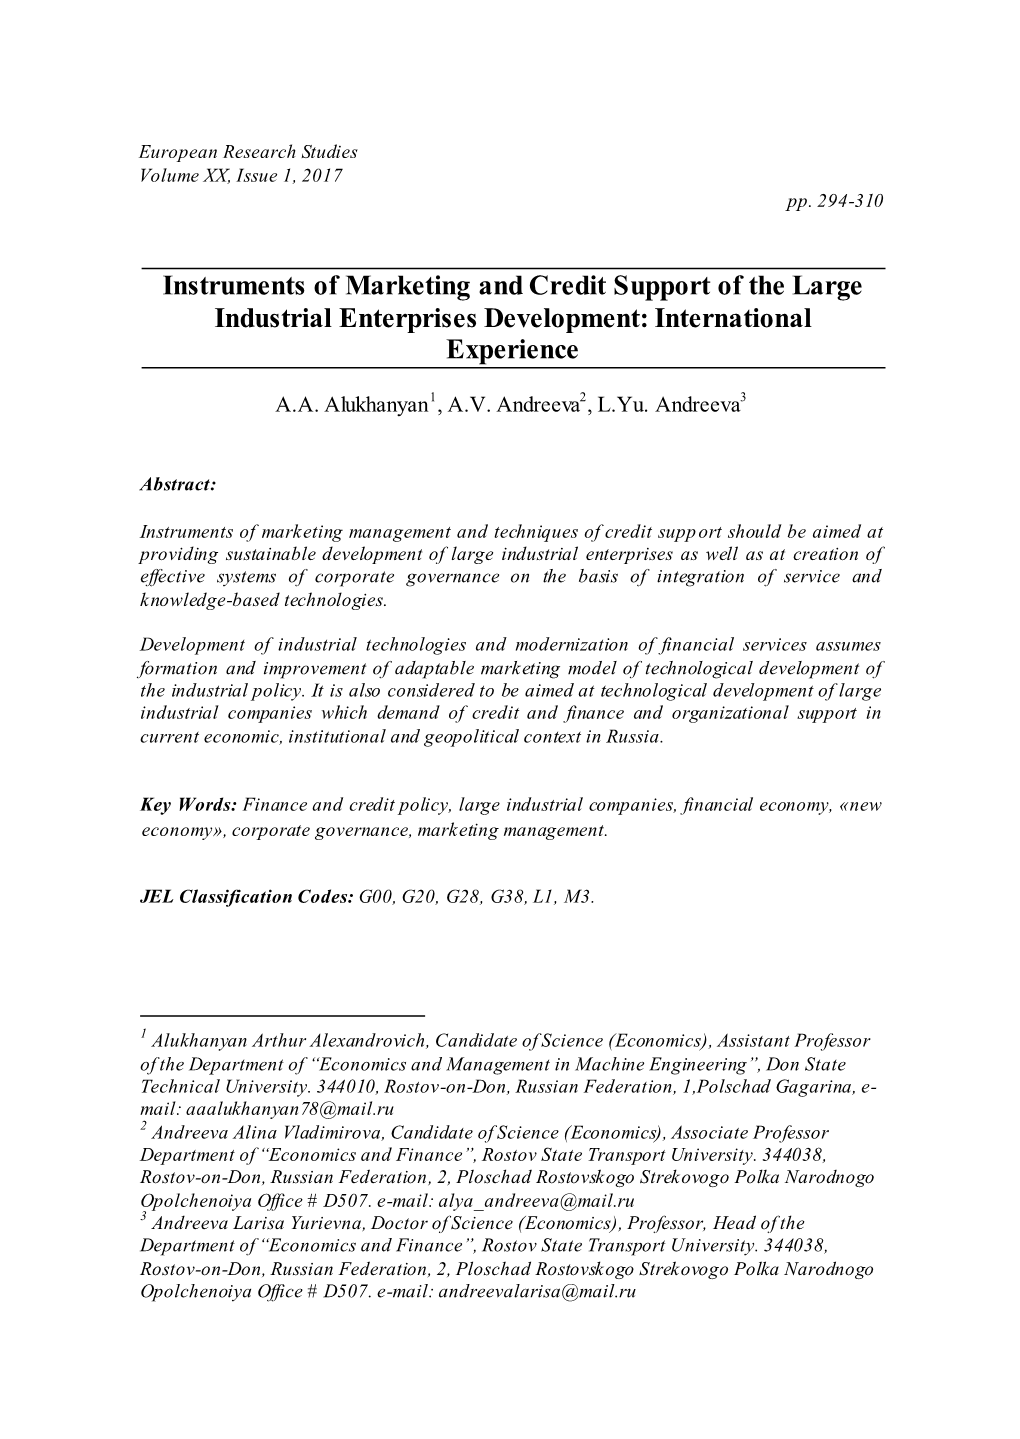 Instruments of Marketing and Credit Support of the Large Industrial Enterprises Development: International Experience